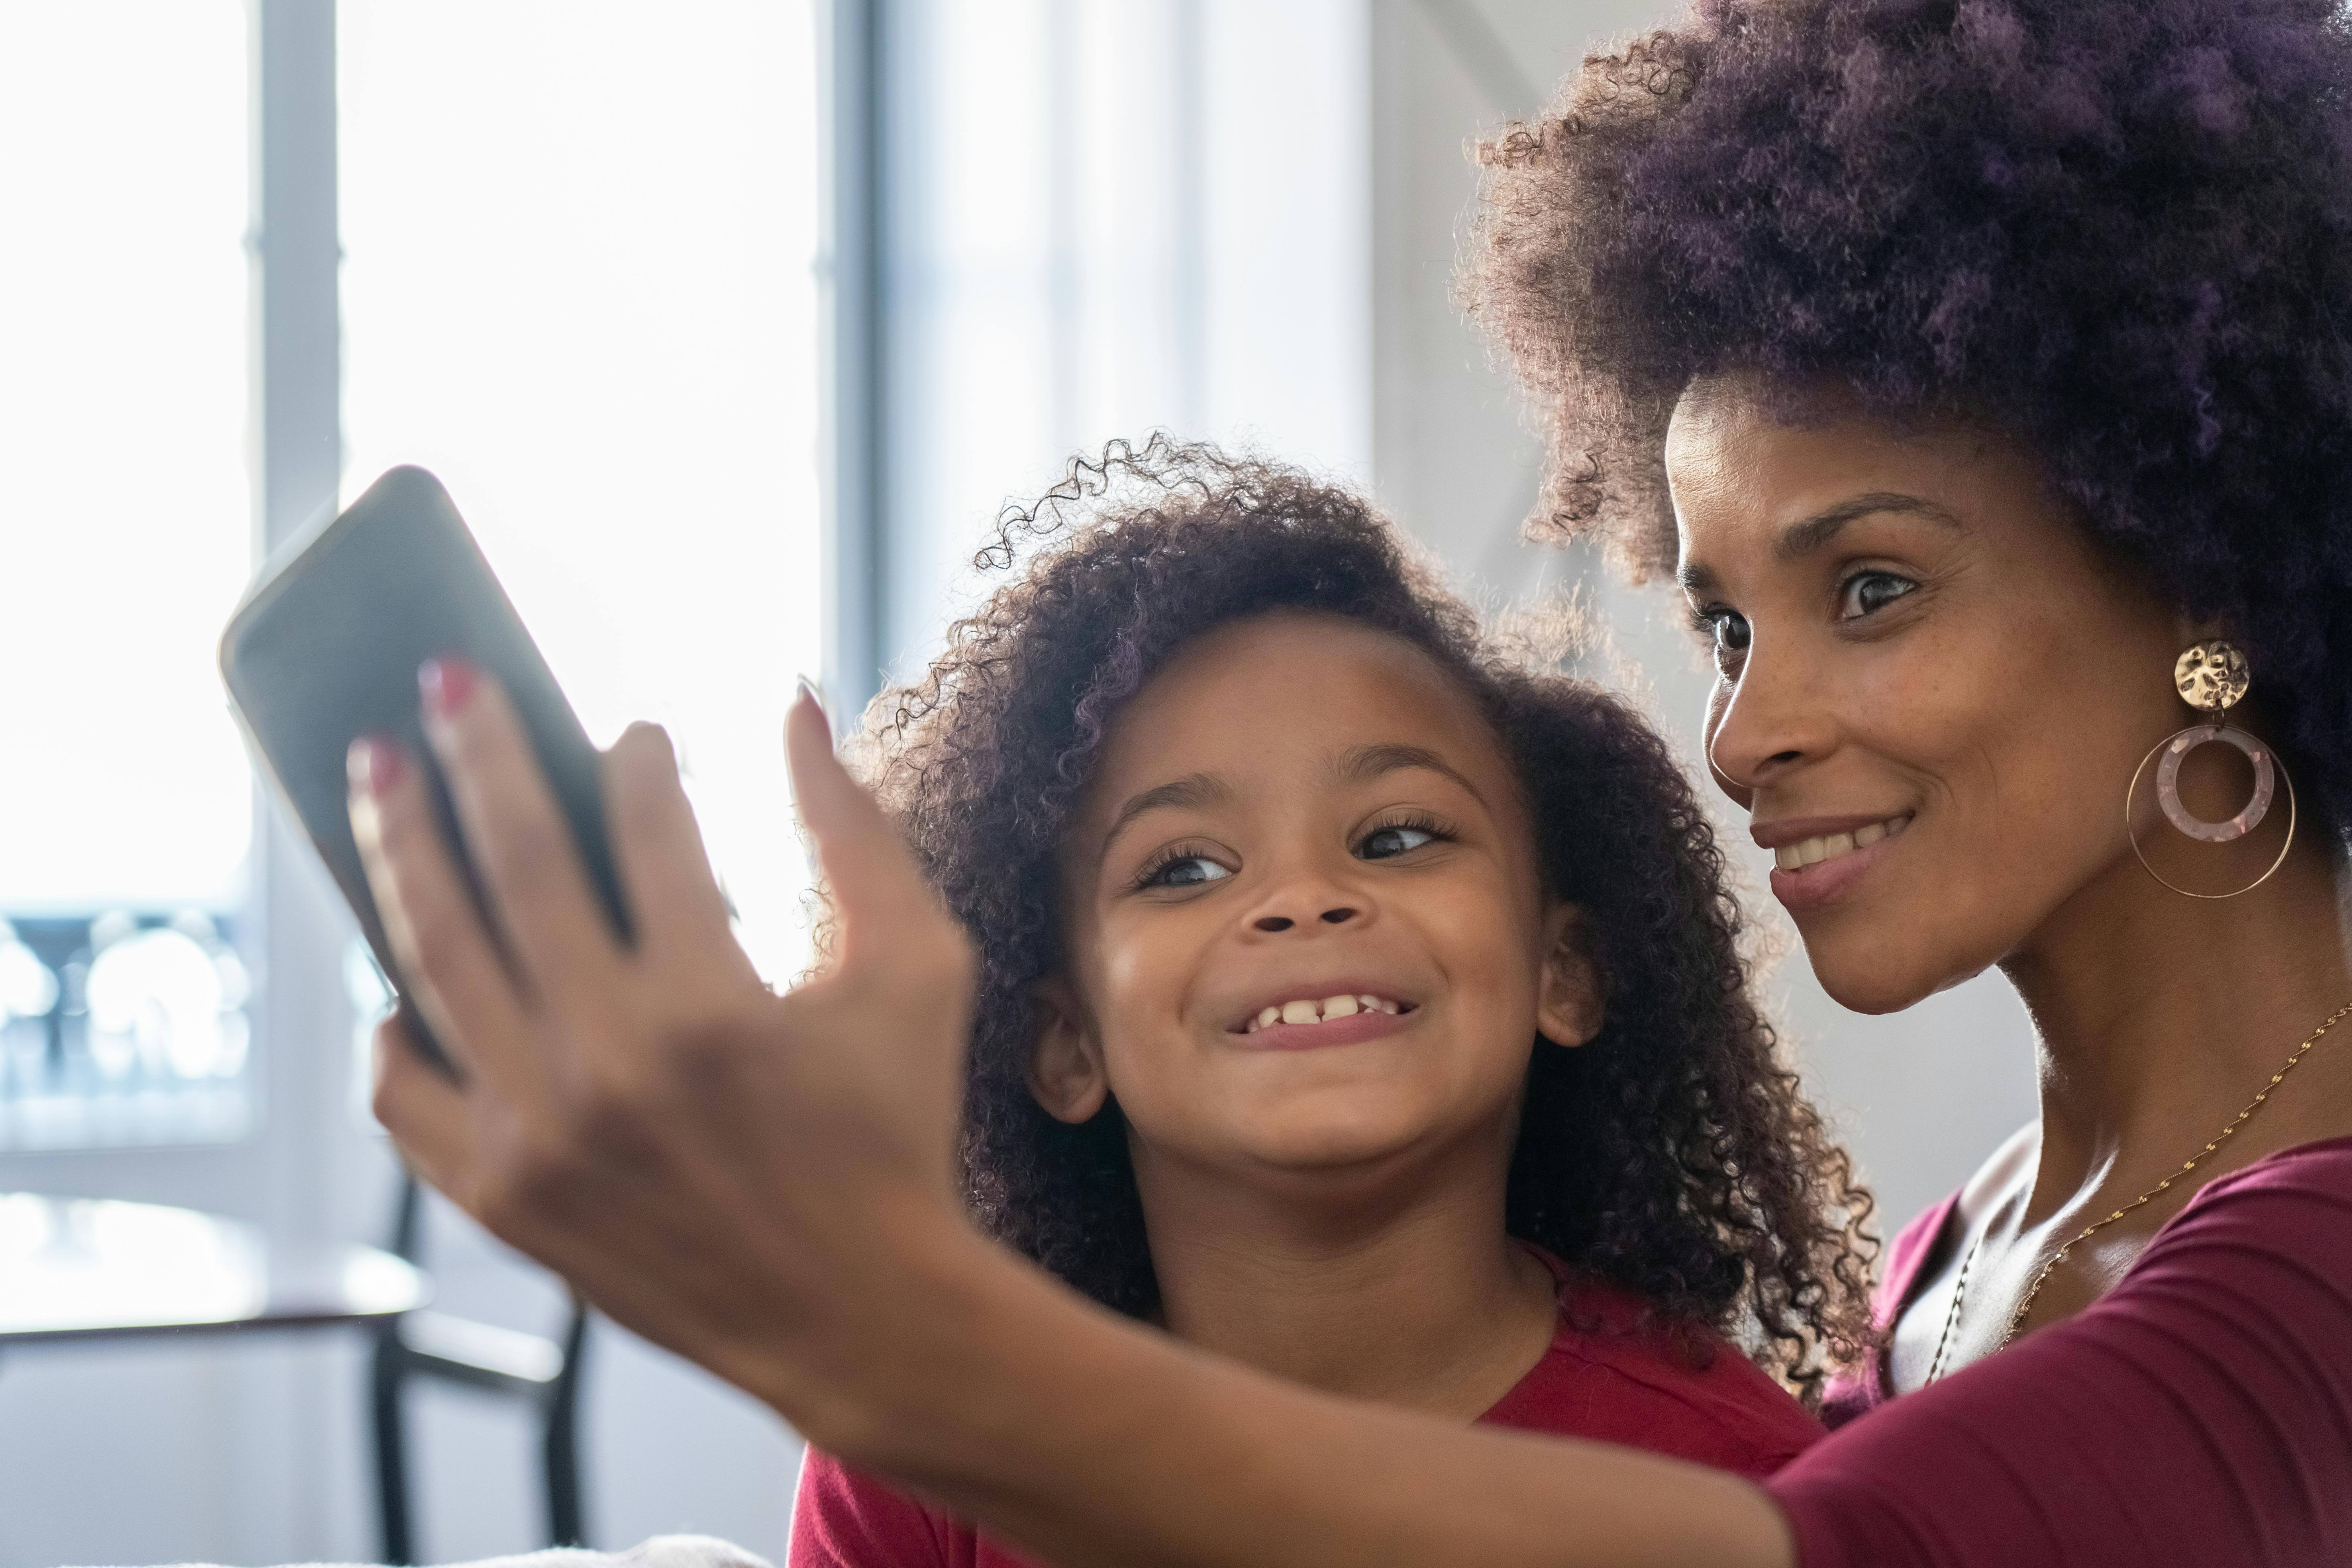 A woman smiling while posing for a selfie with gold earrings as her daughter looks on | Source: Pexels